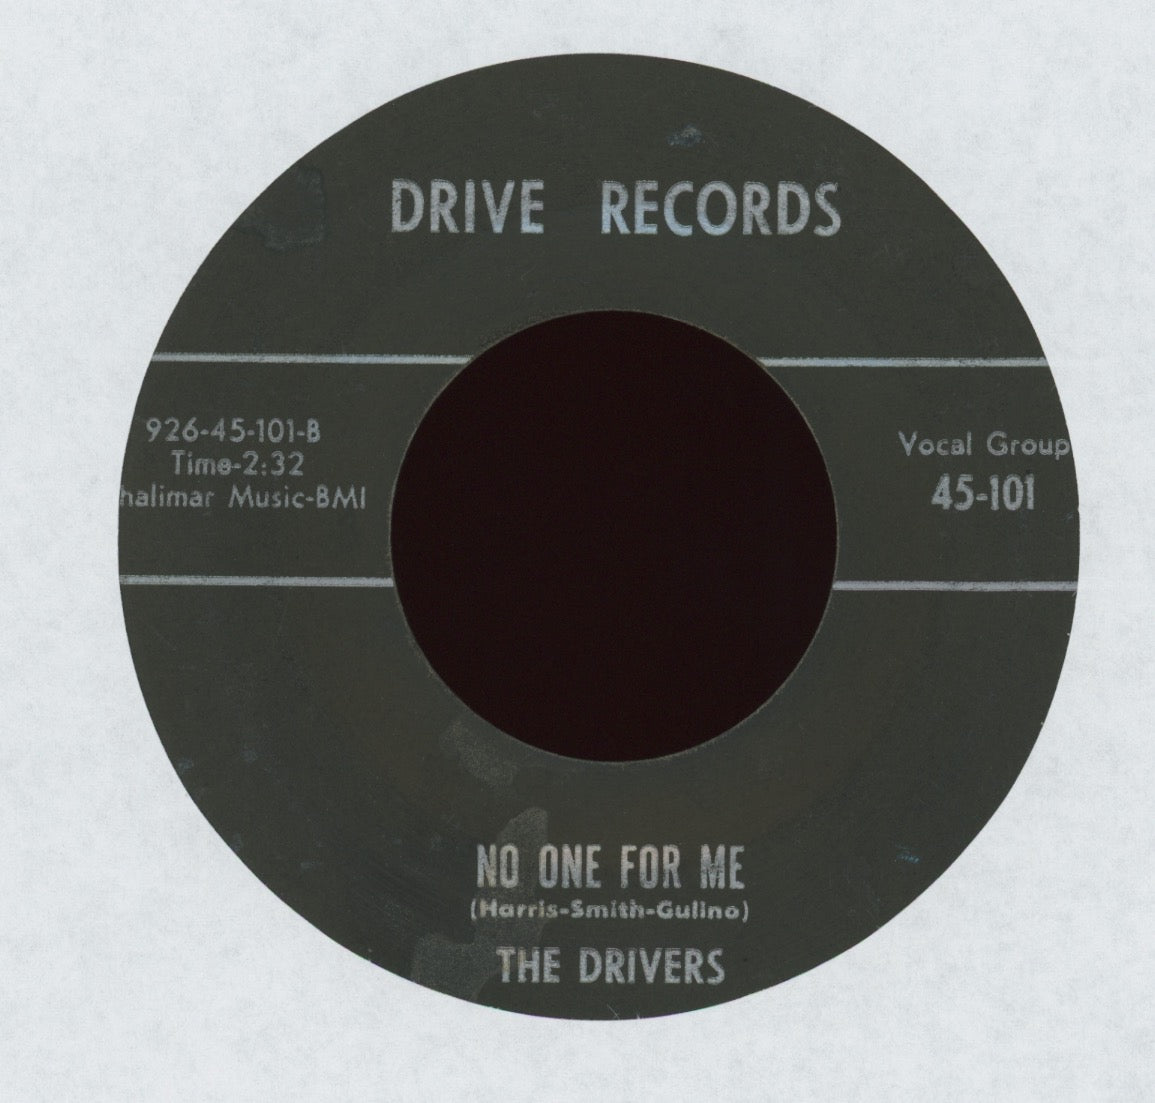 The Drivers - Stutterin' Johnny on Drive